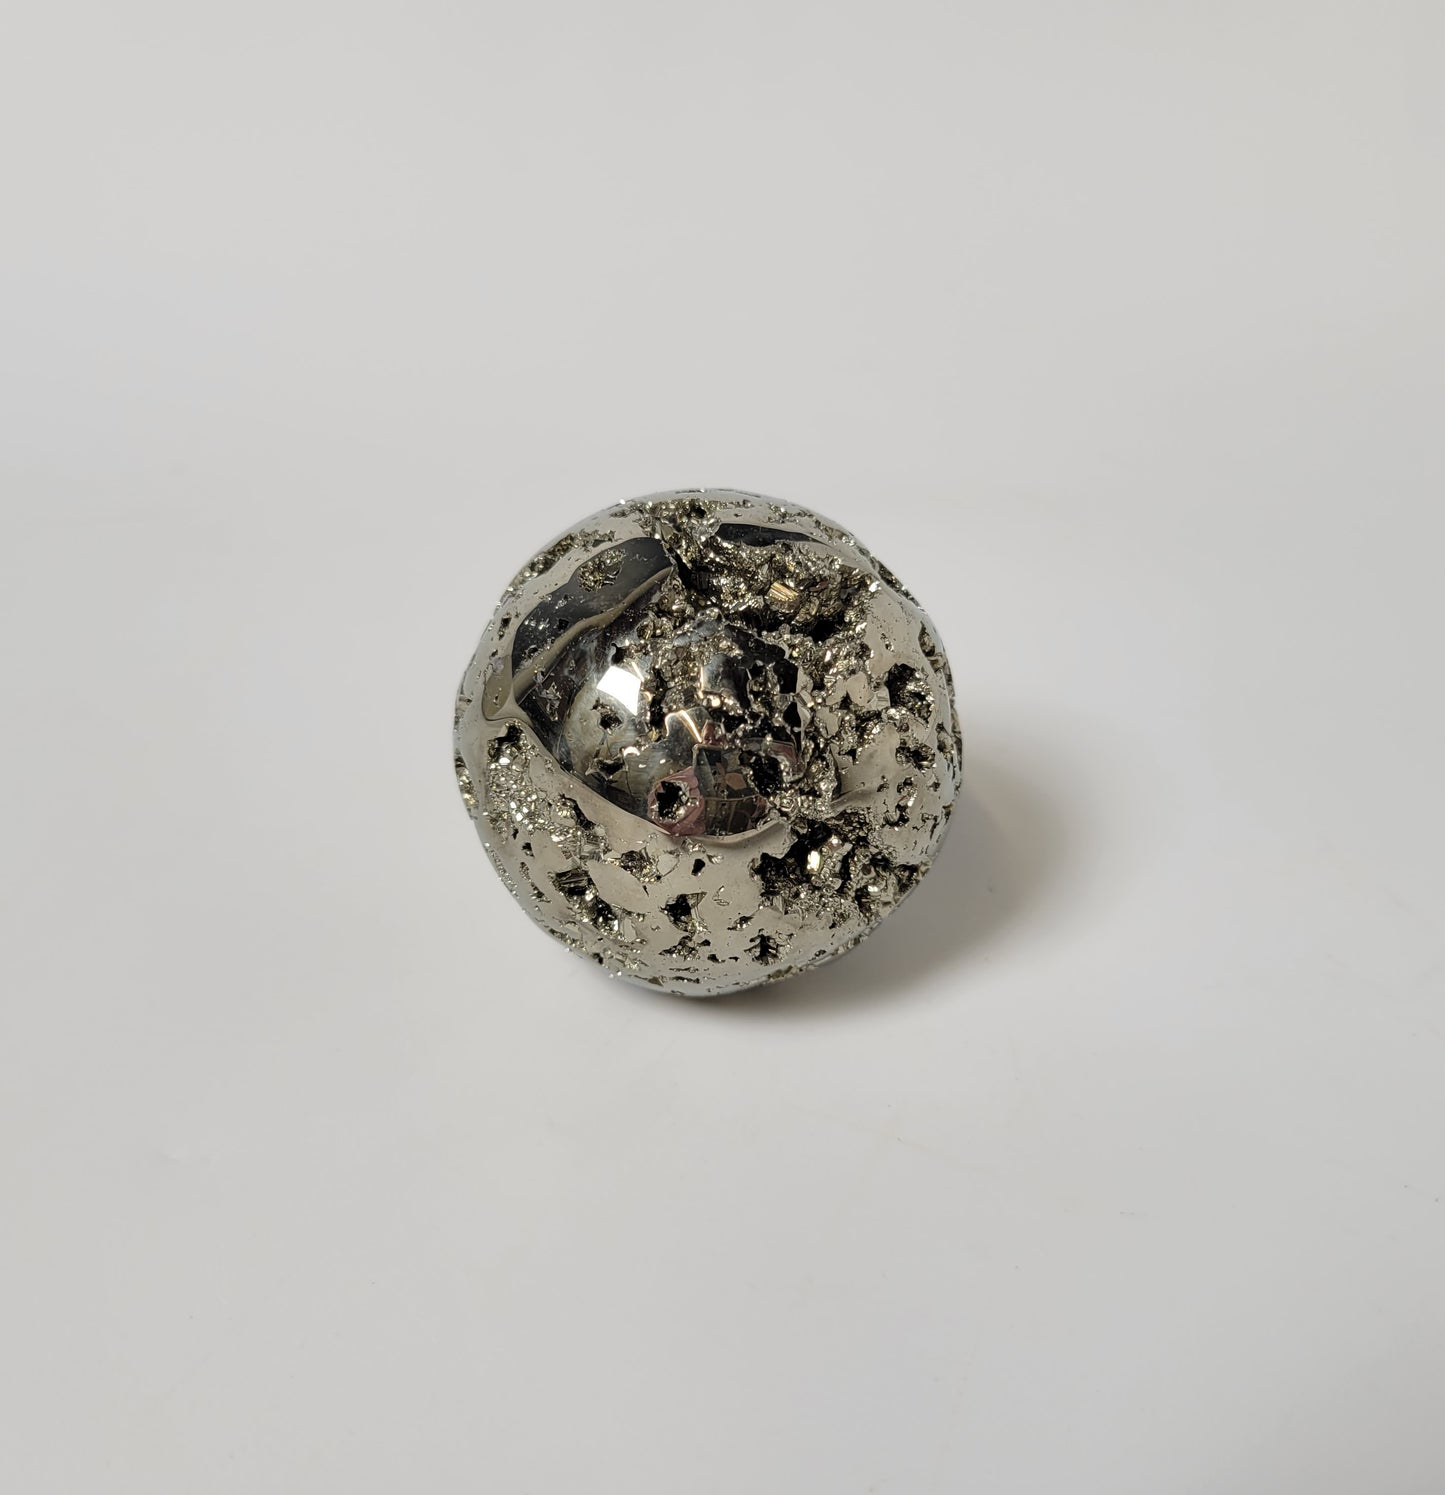 Pyrite Sphere from Spain